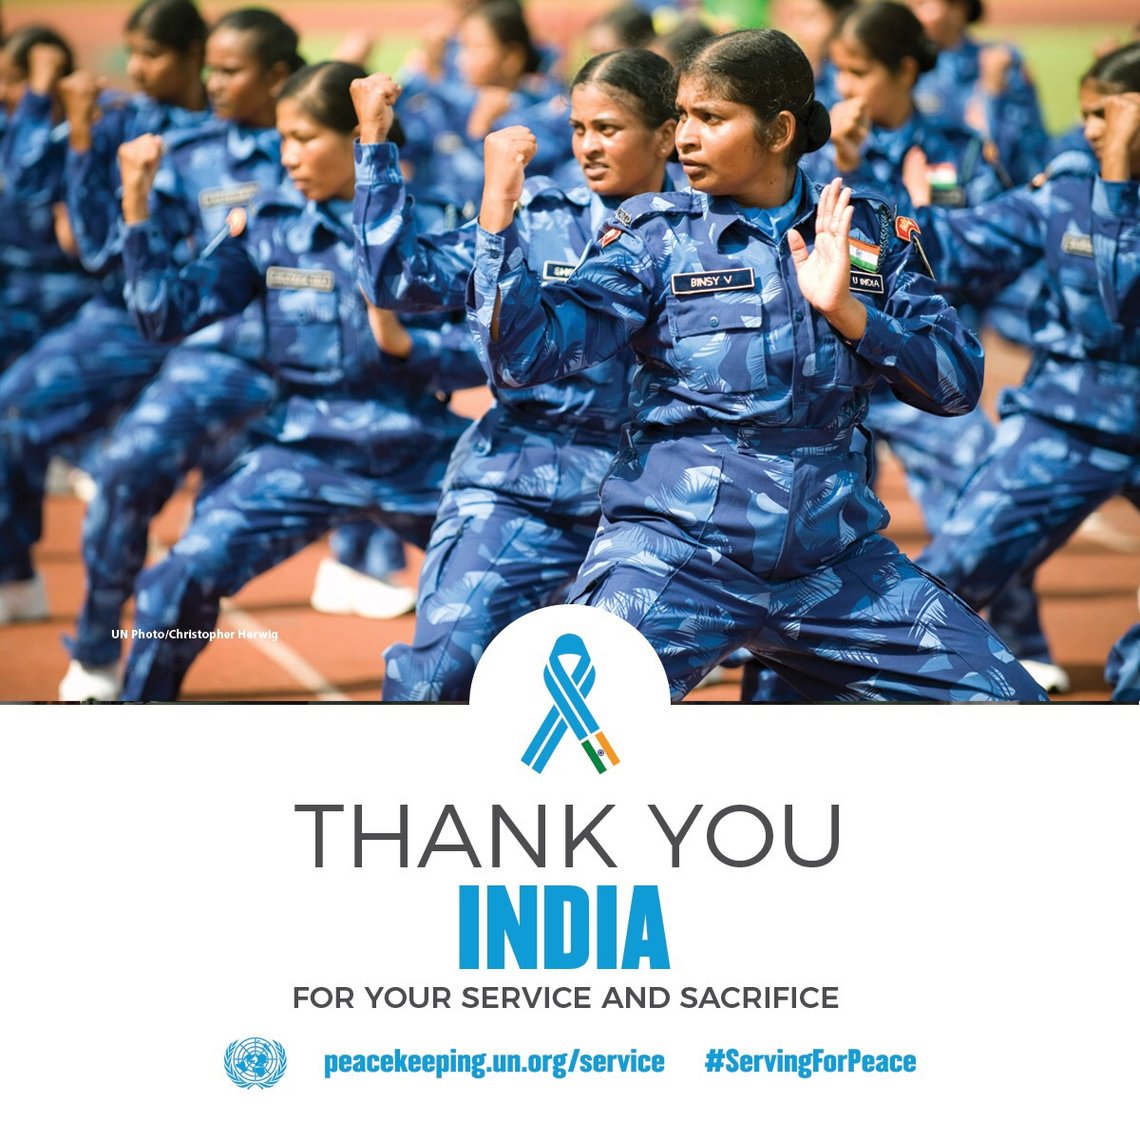 A salute to the UN peacekeeping forces : The Tribune India